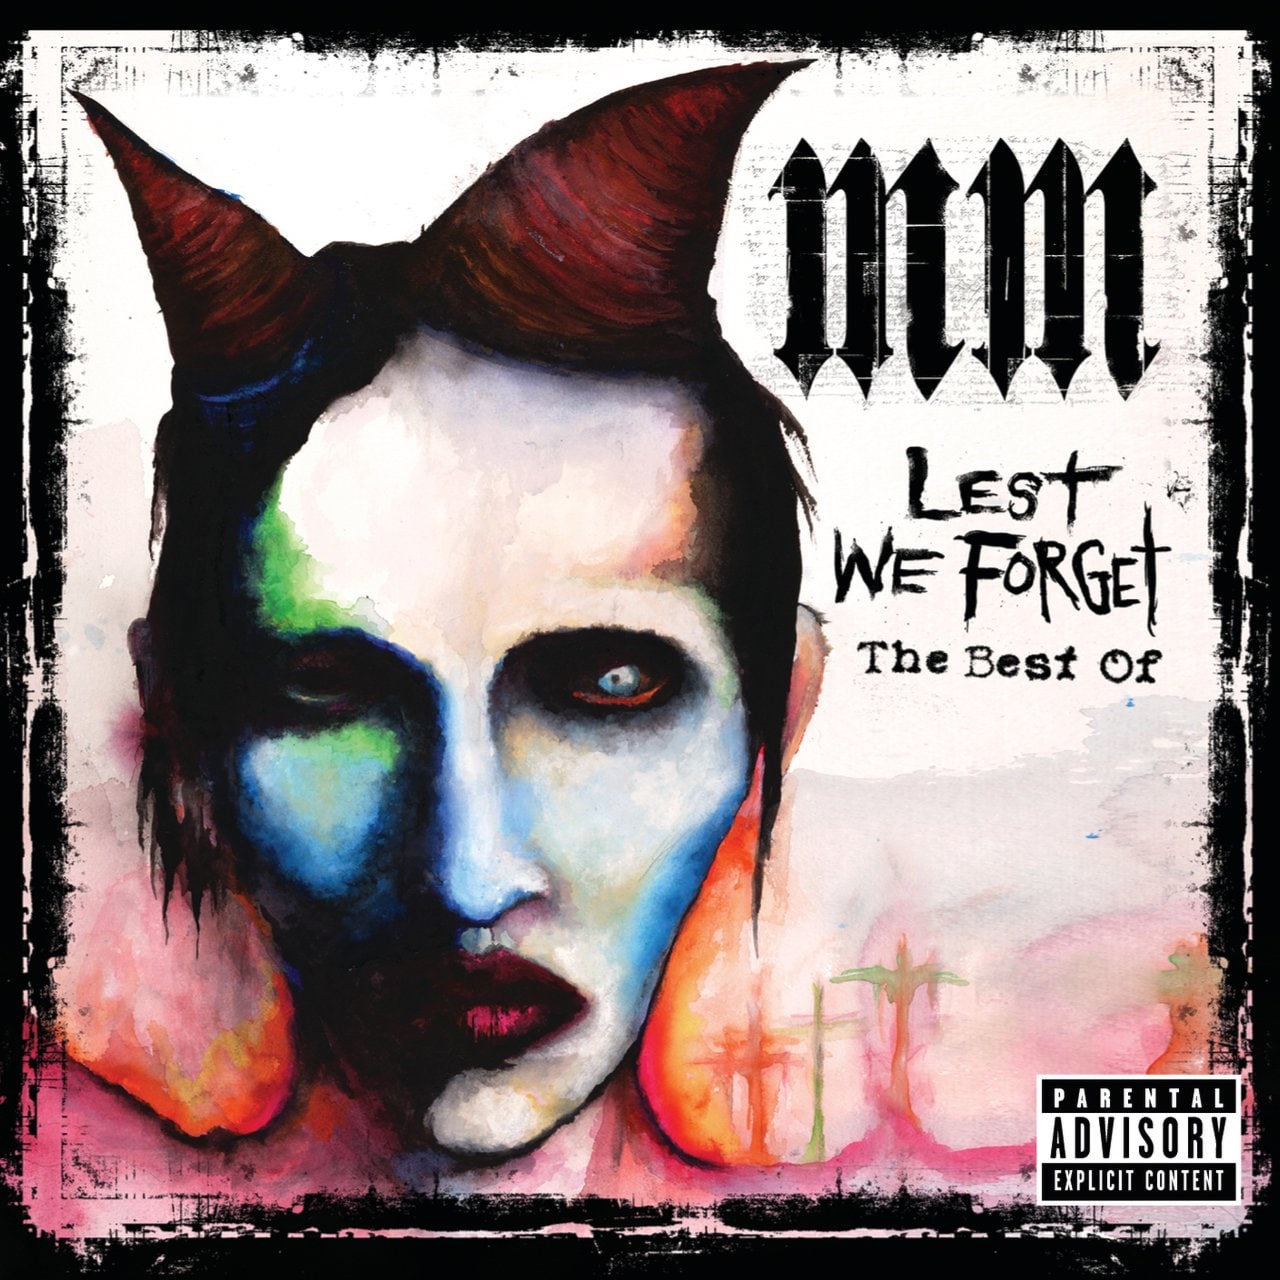 Marilyn manson lest we forget rapidshare free